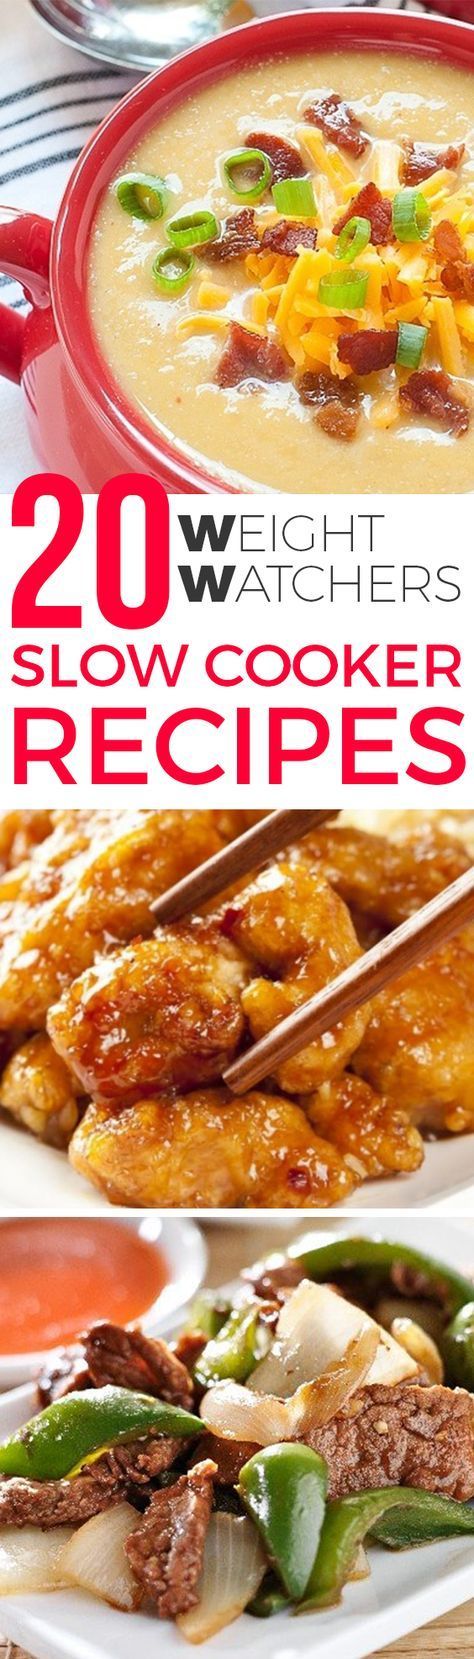 Ww slow cooker recipes